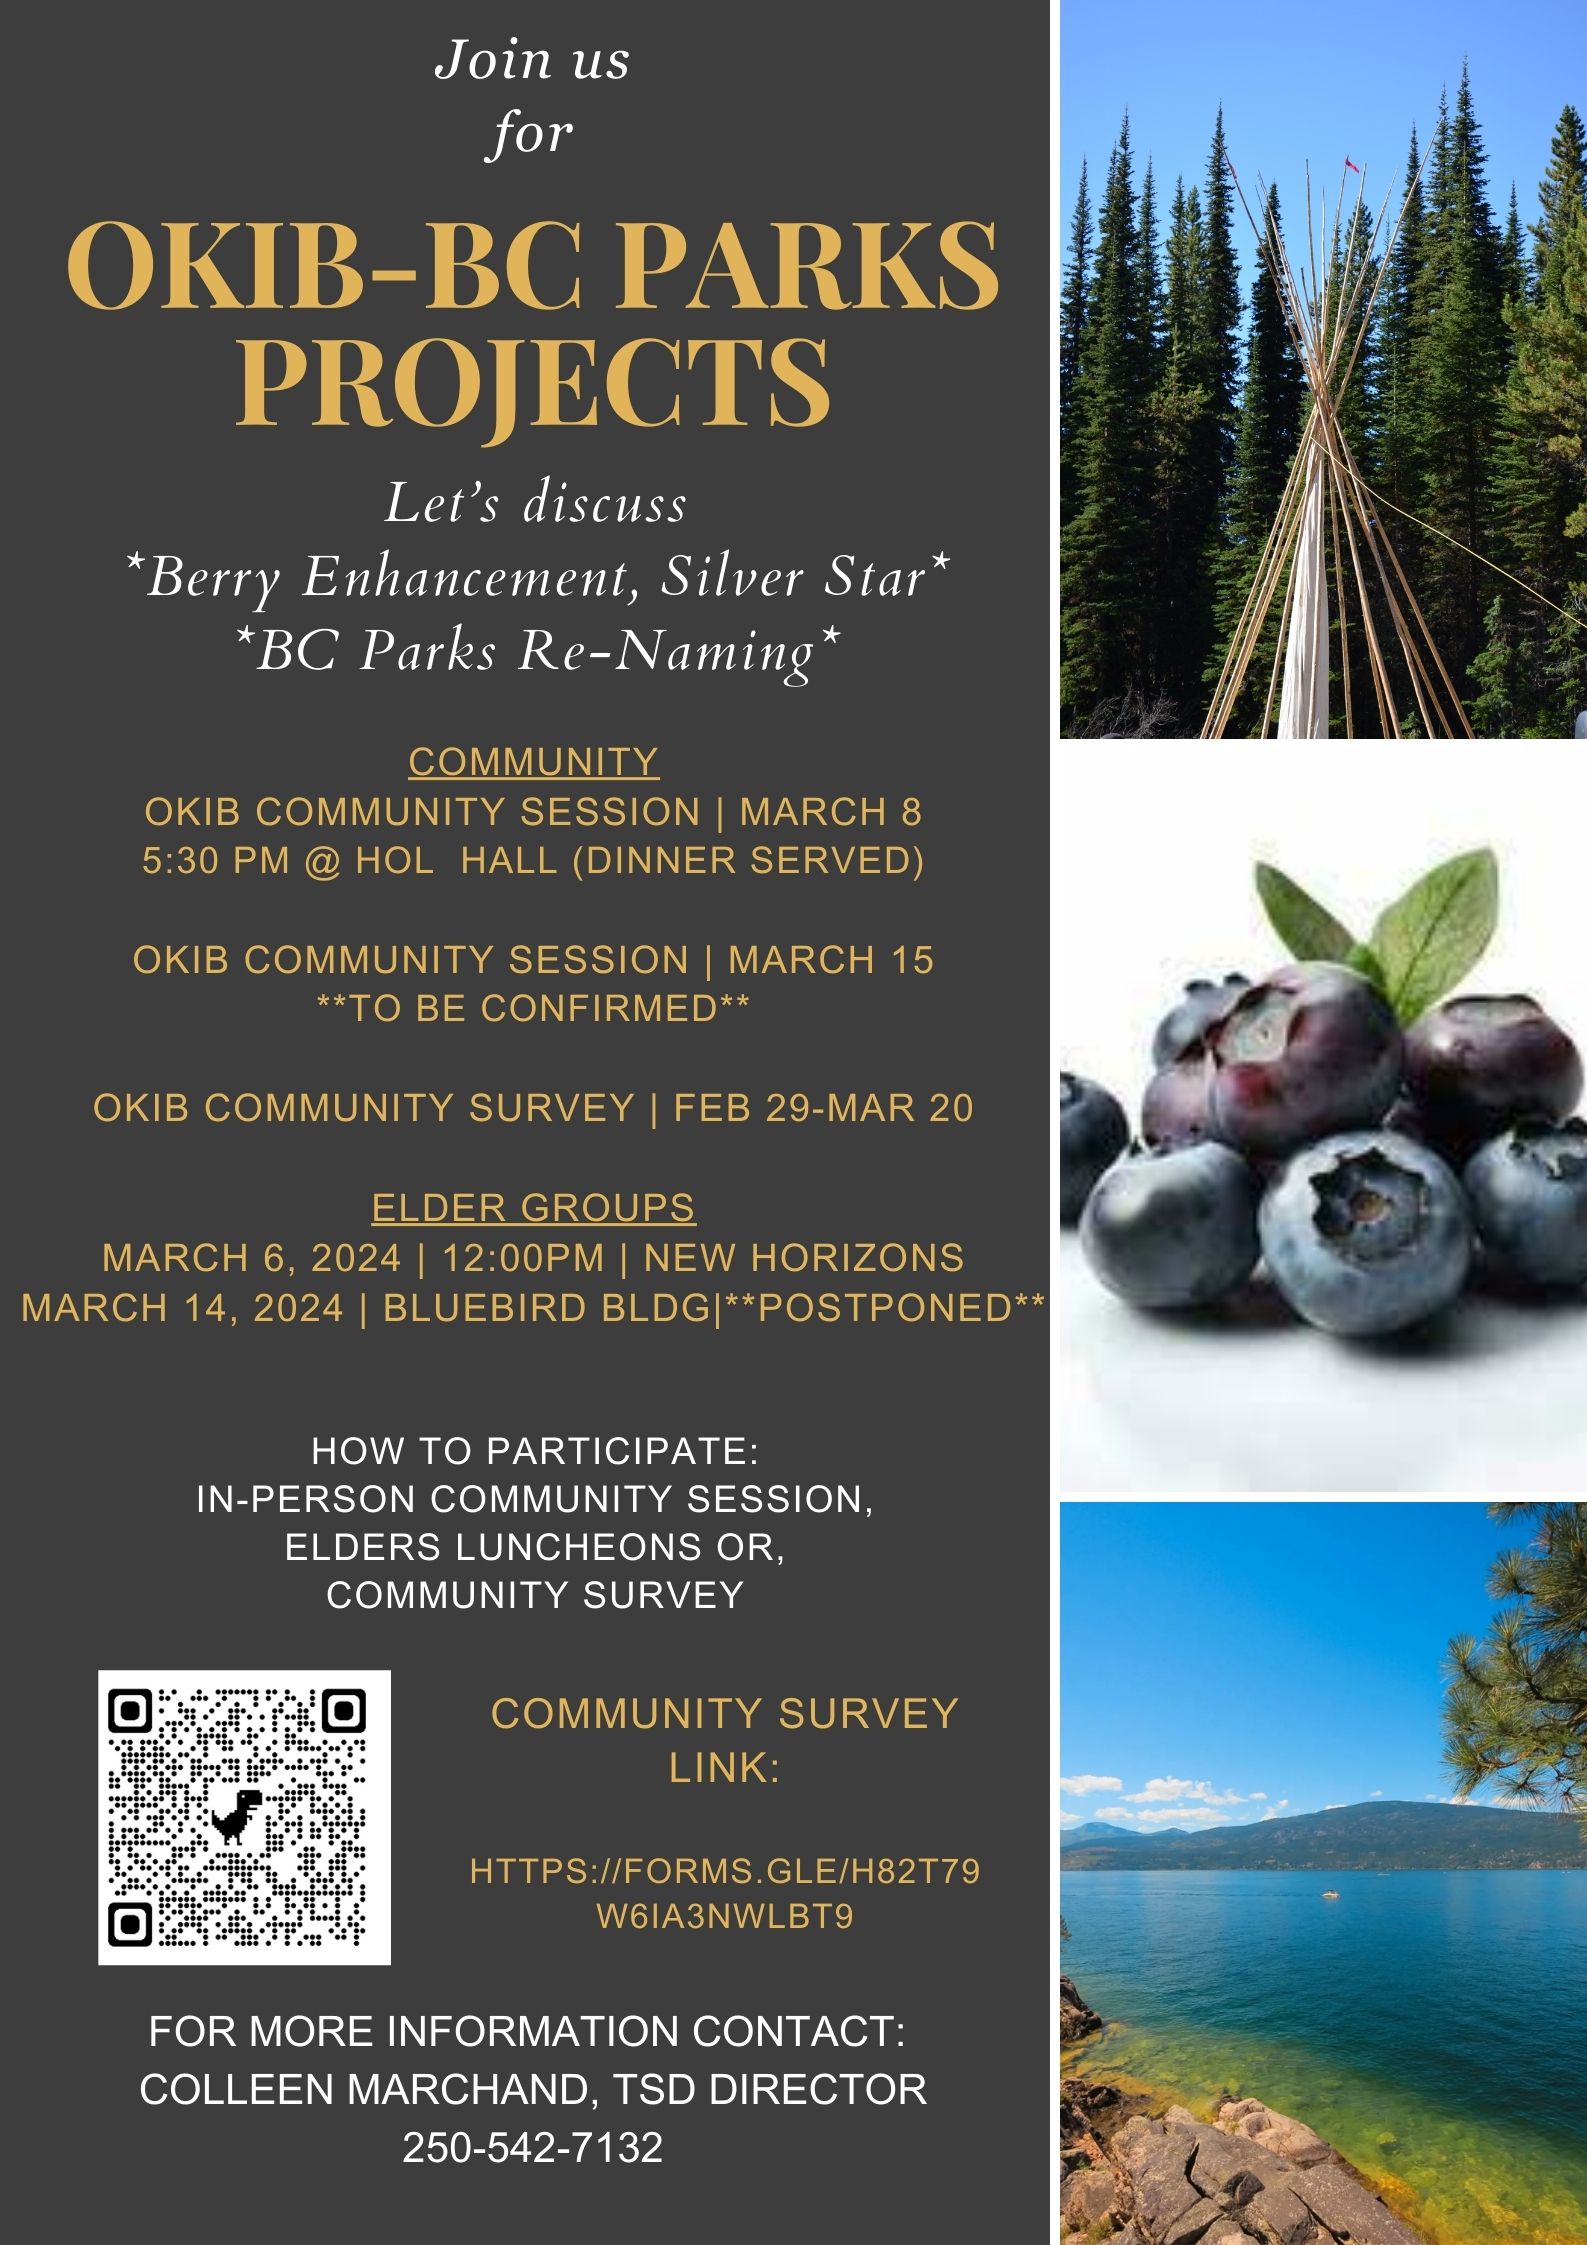 OKIB & BC Parks Projects March 14 & 15 engagement sessions postponed